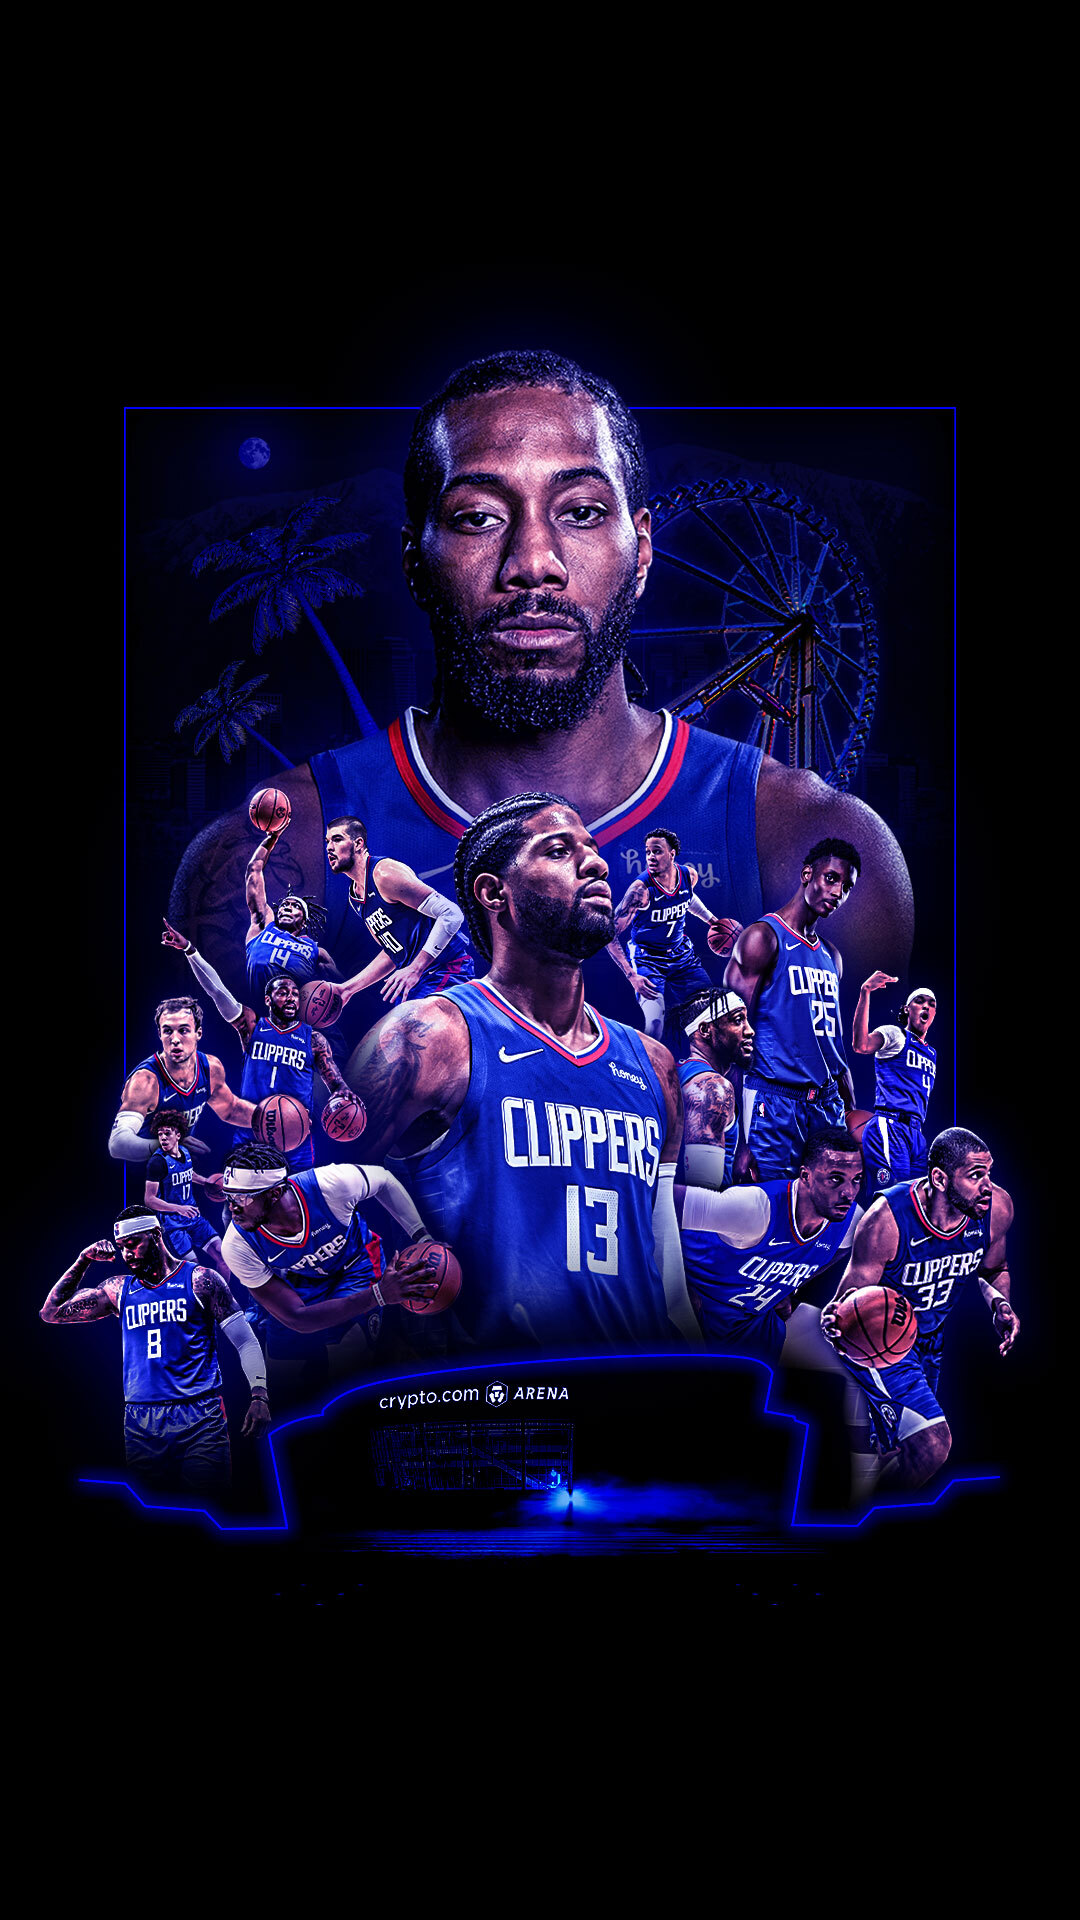 LA Clippers your TL this Wallpaper Wednesday!